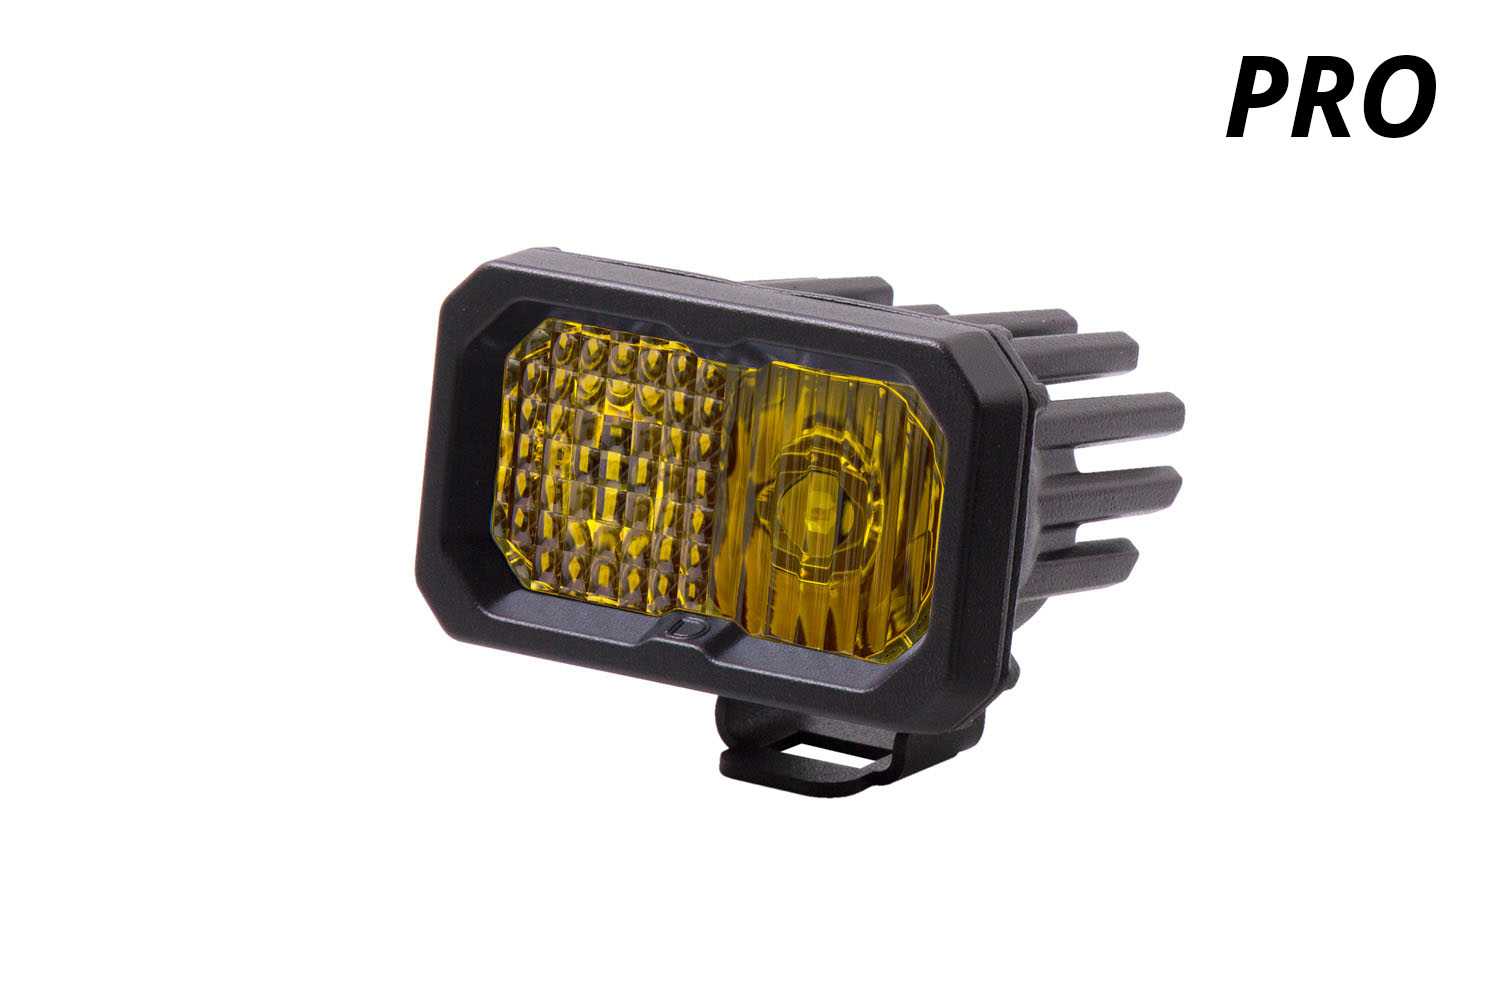 Diode Dynamics Stage Series 2 Inch LED Pod, Pro Yellow Spot Standard ABL Each - Click Image to Close